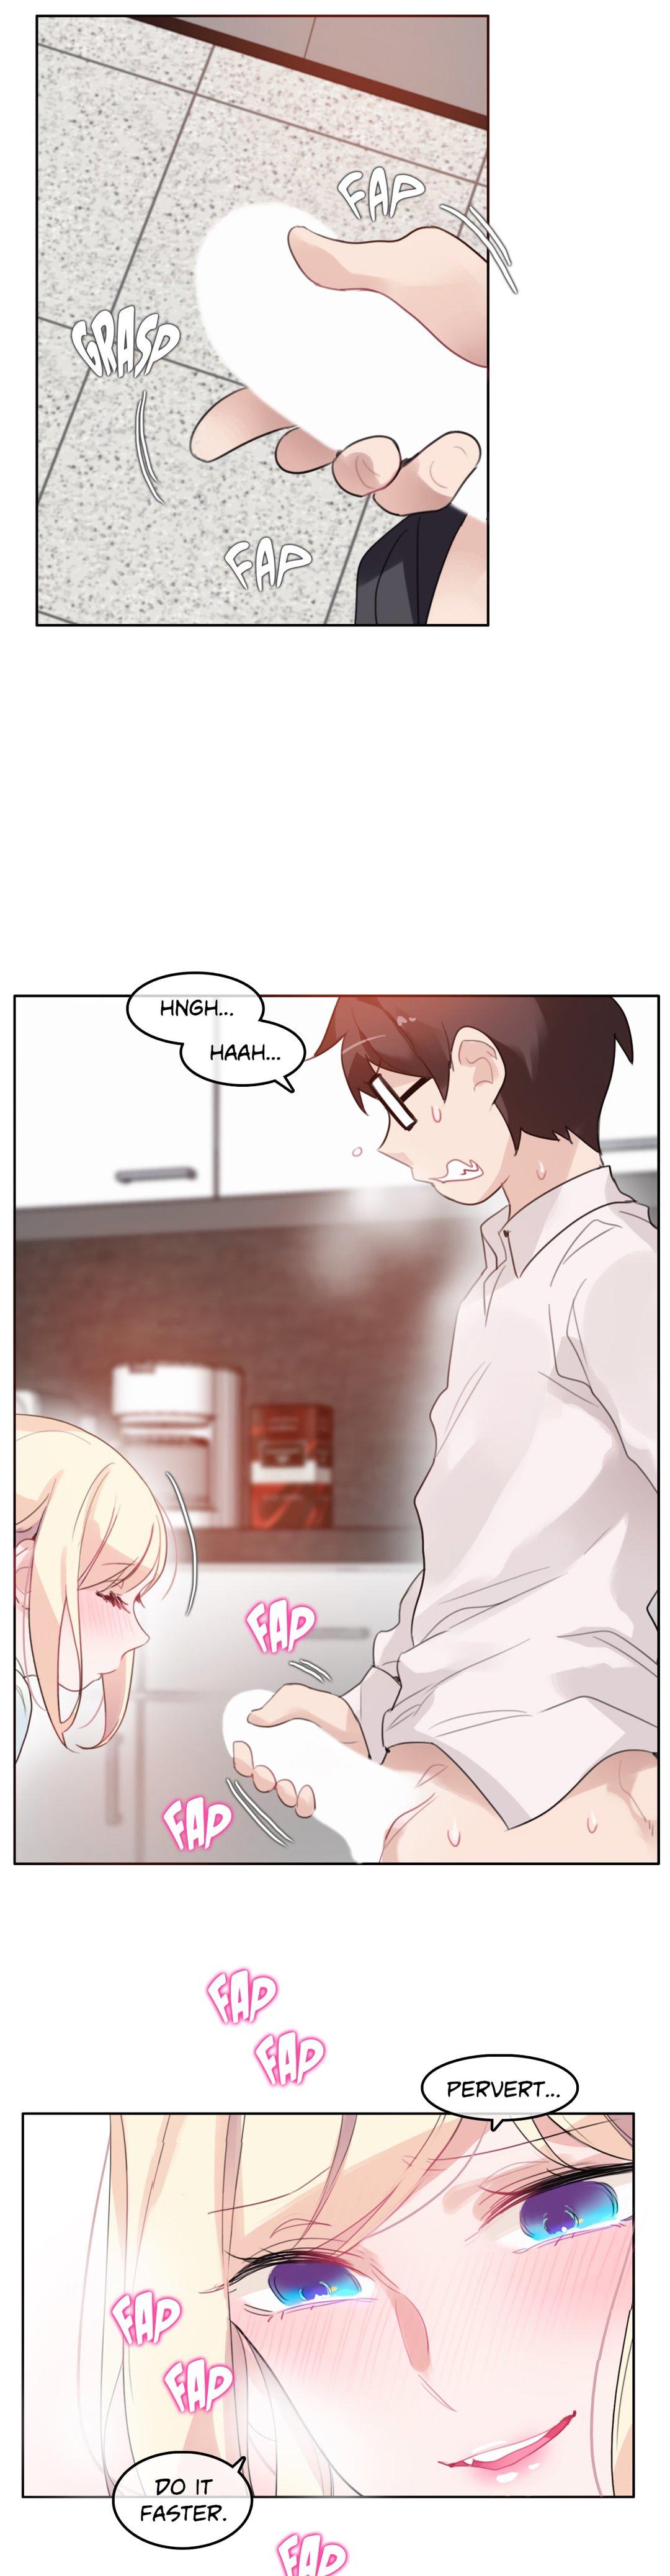 A Pervert's Daily Life Ch. 1-34 720